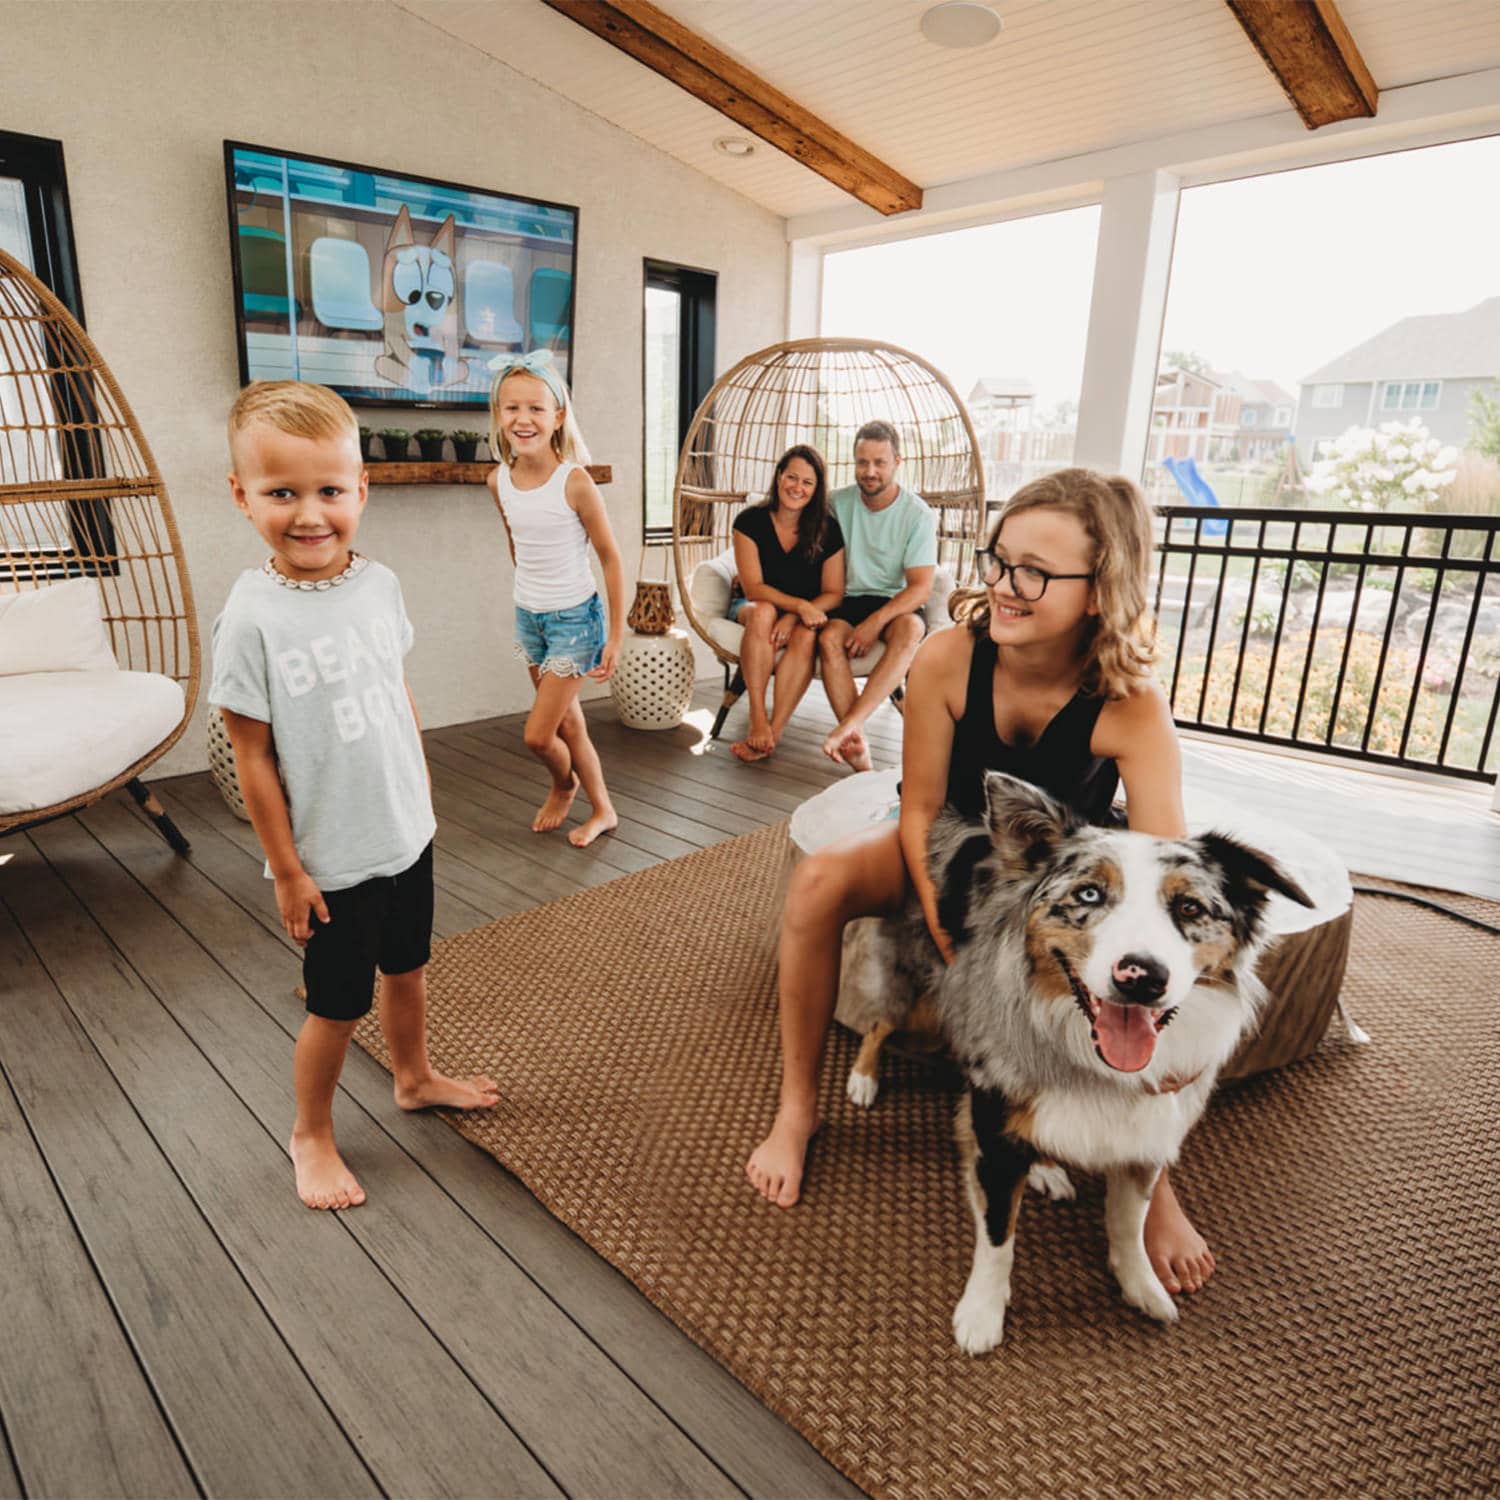 No matter the weather, this family in Bethlehem can enjoy their favorite activities on their beautiful covered deck!